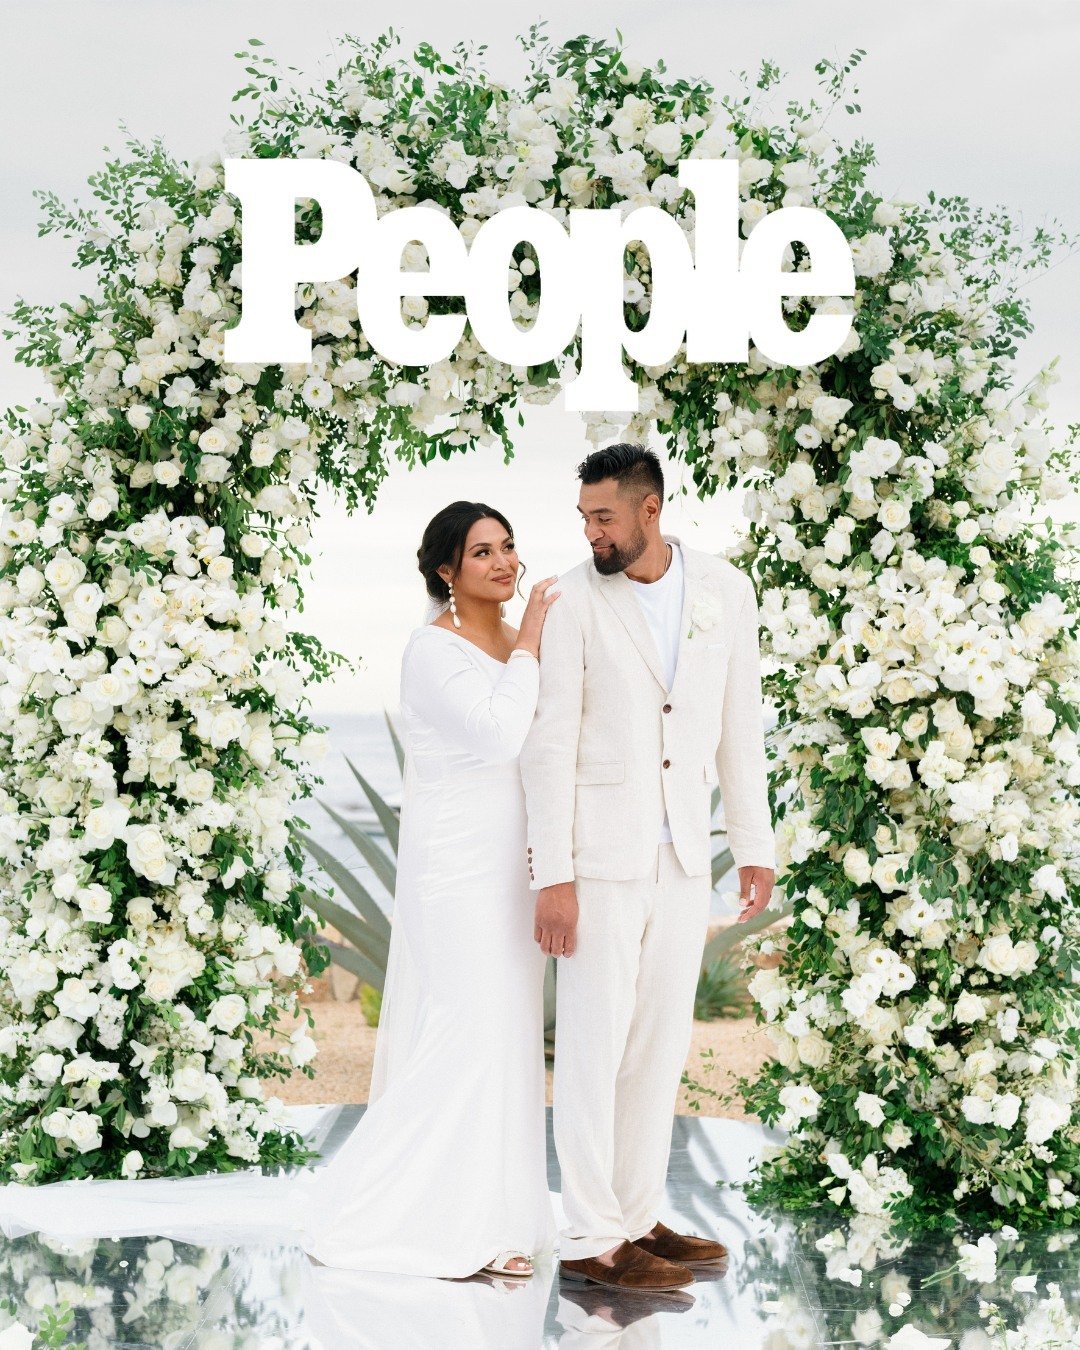 PGA Golfer @tonyfinaugolf + @laynafinau 's romantic vow renewal is live exclusively on @people! 🤍🌾 

We're so excited to have placed @karlacasillasandco on PEOPLE.com where you can see the larger than life details that her team brought to life! 

T